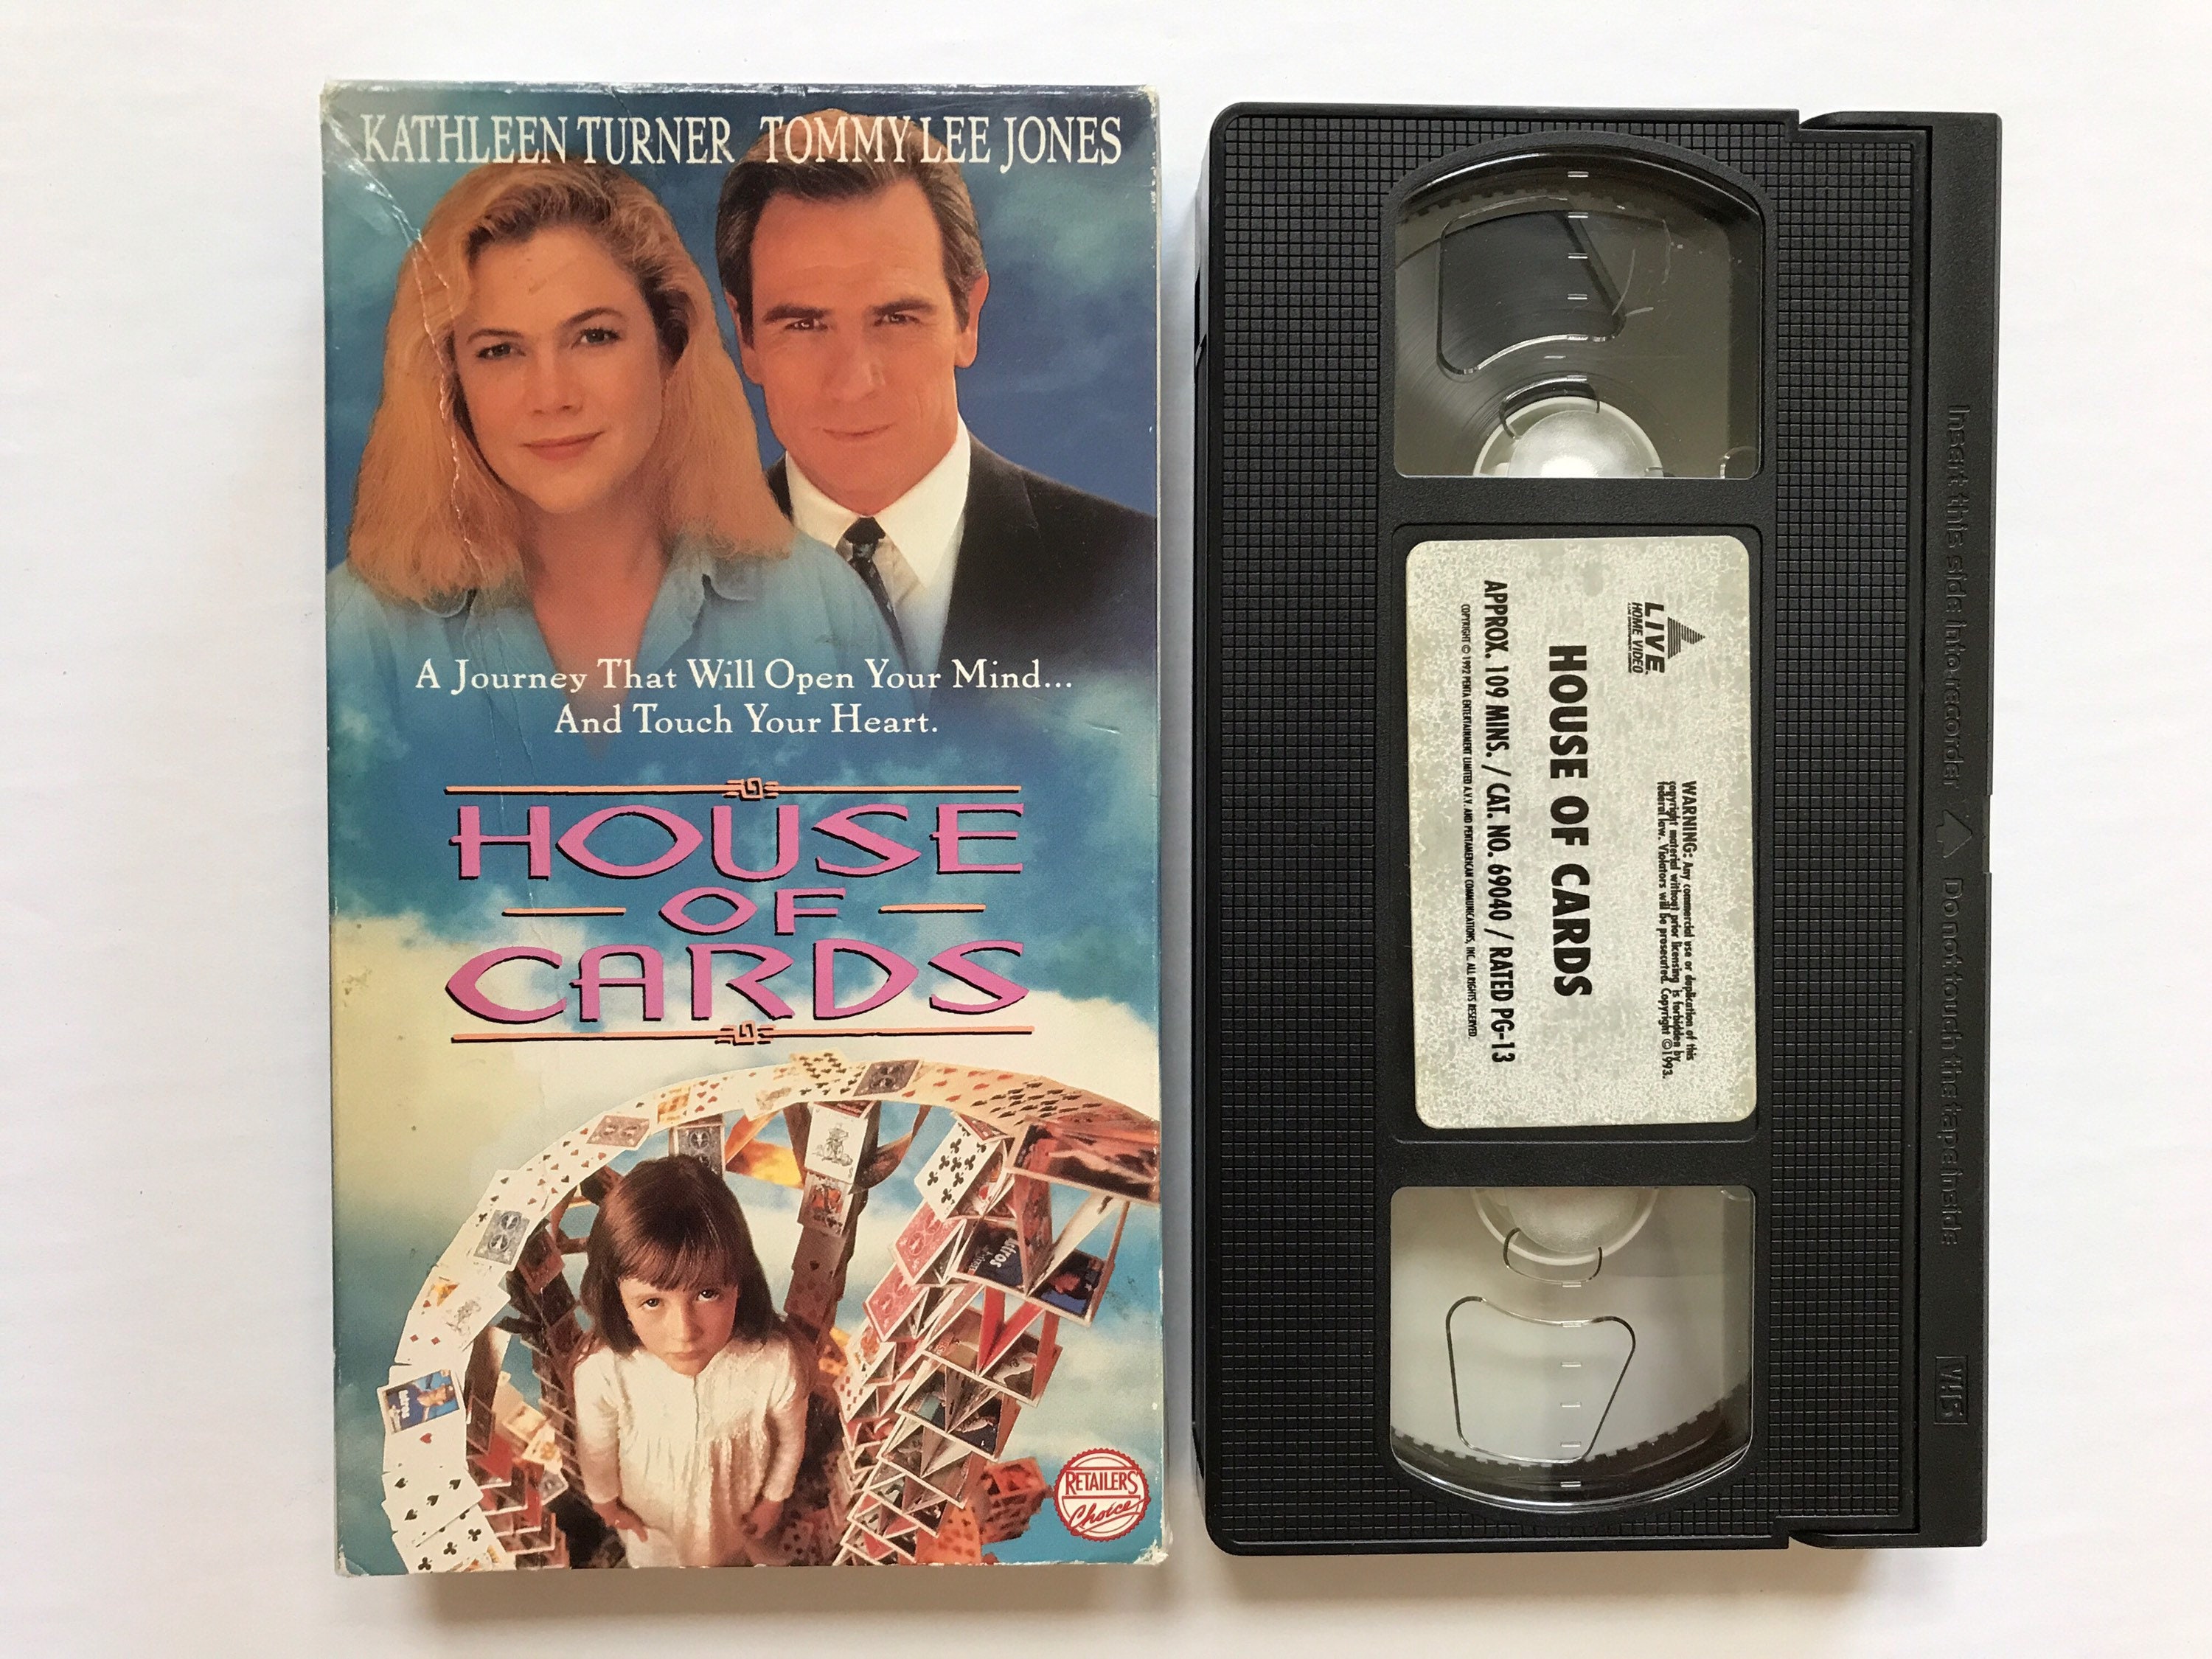 SALE 1993 House of Cards VHS Video Tape Film Movie Kathleen